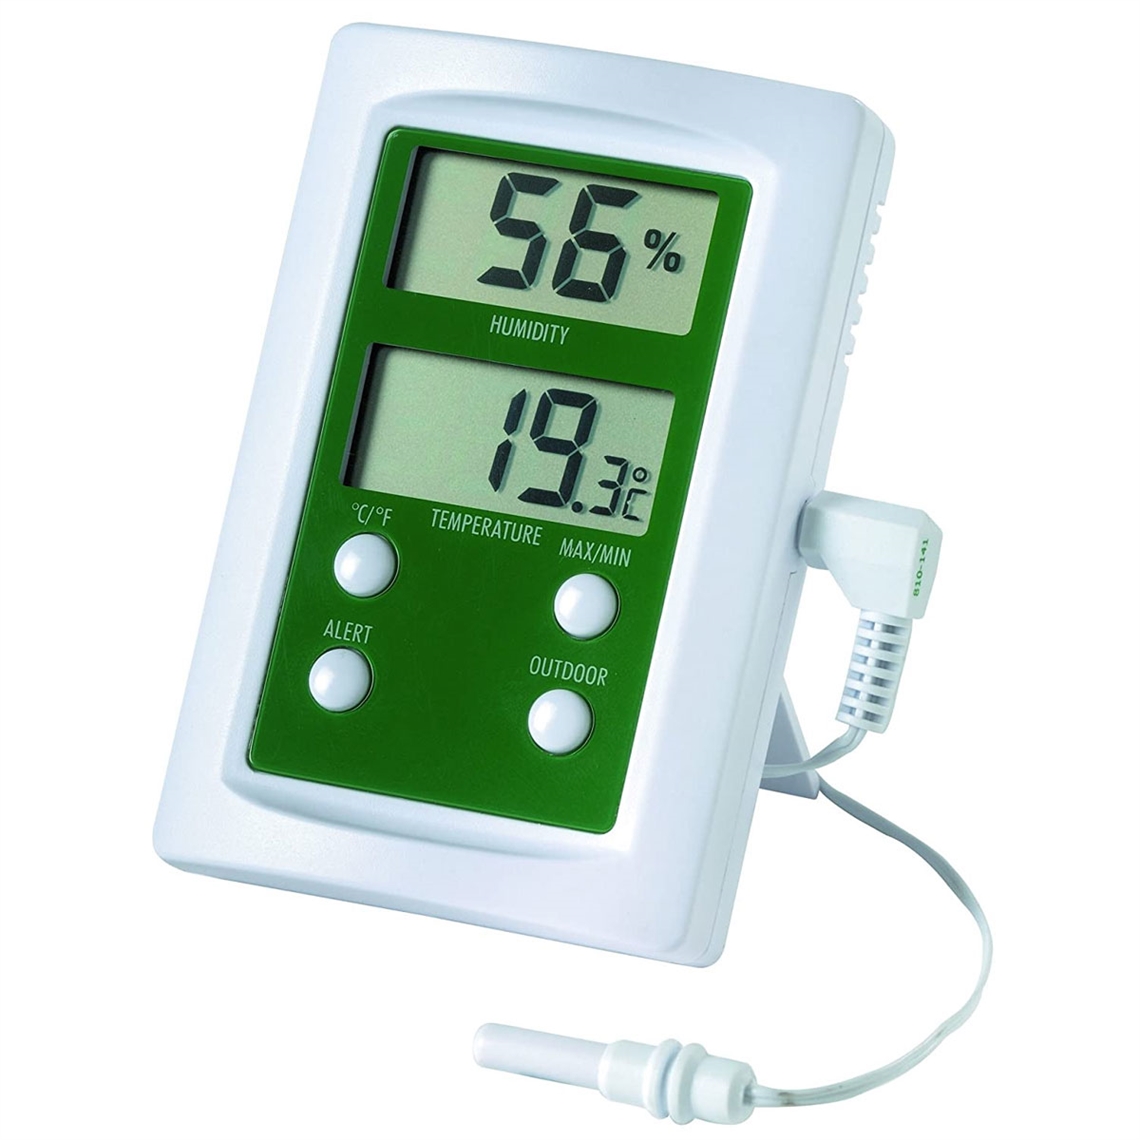 View more fondis from our Thermo Hygrometers range